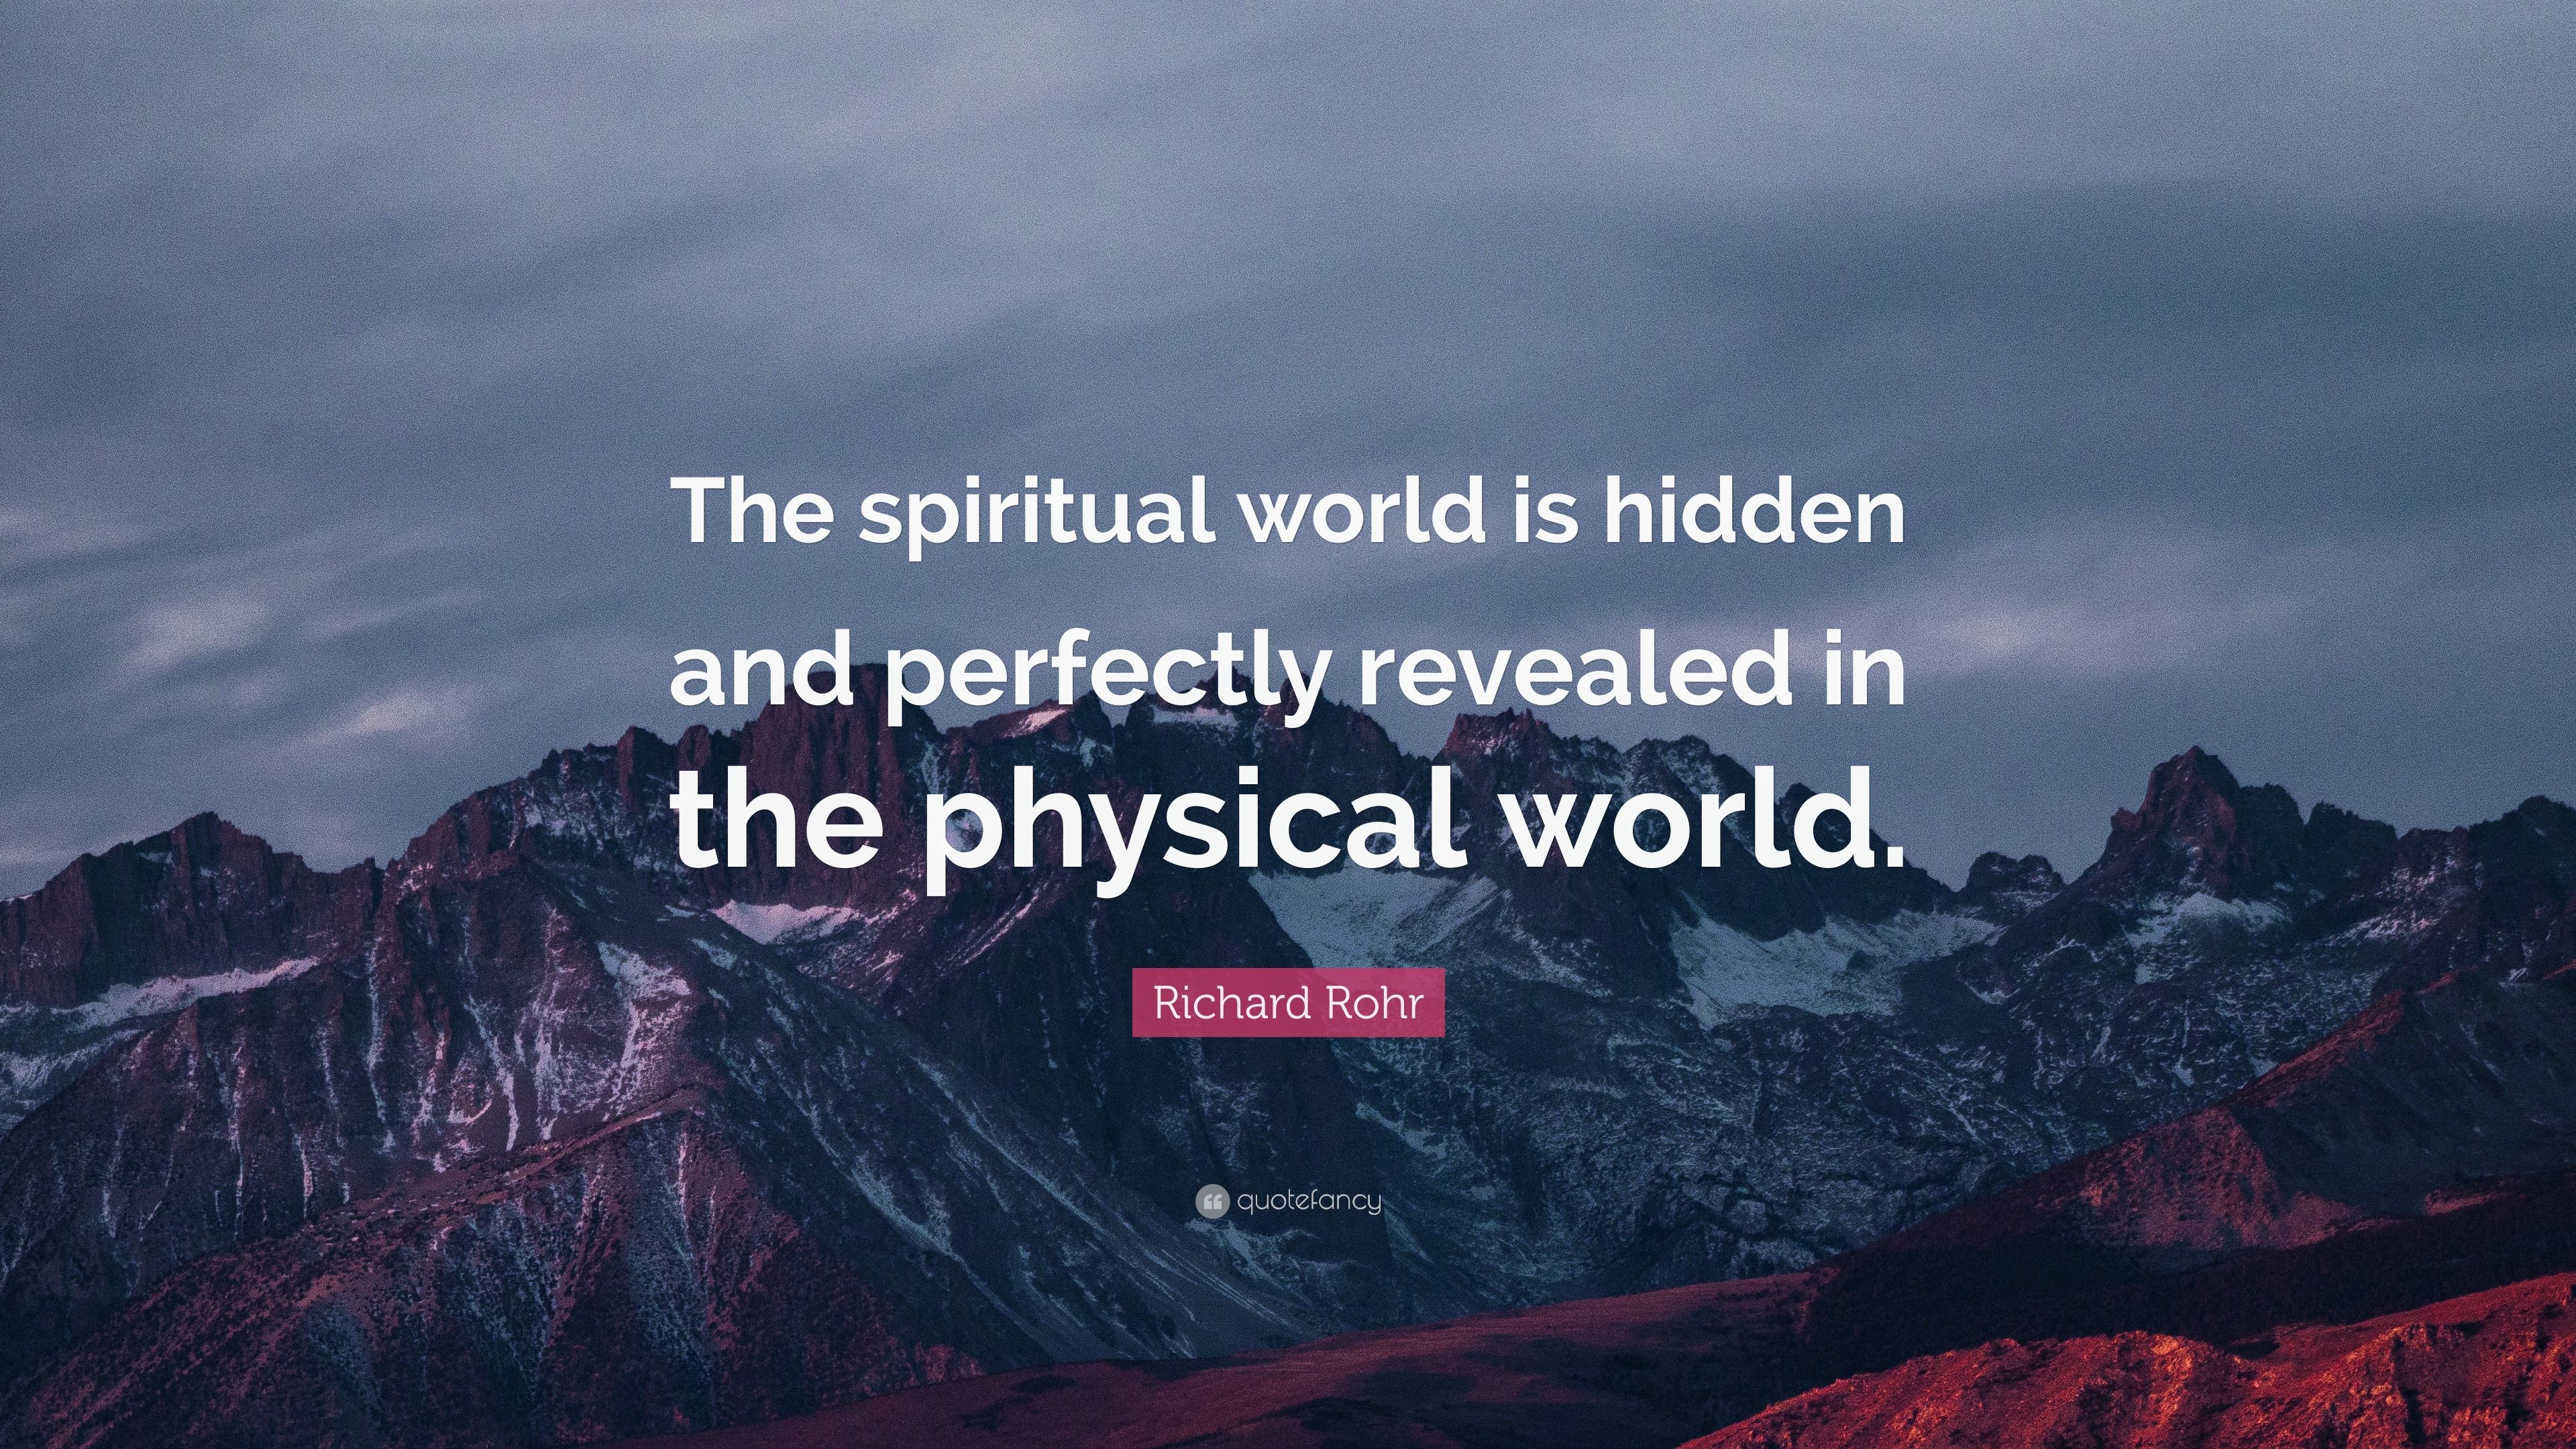 Richard Rohr Quote: “The spiritual world is hidden and perfectly